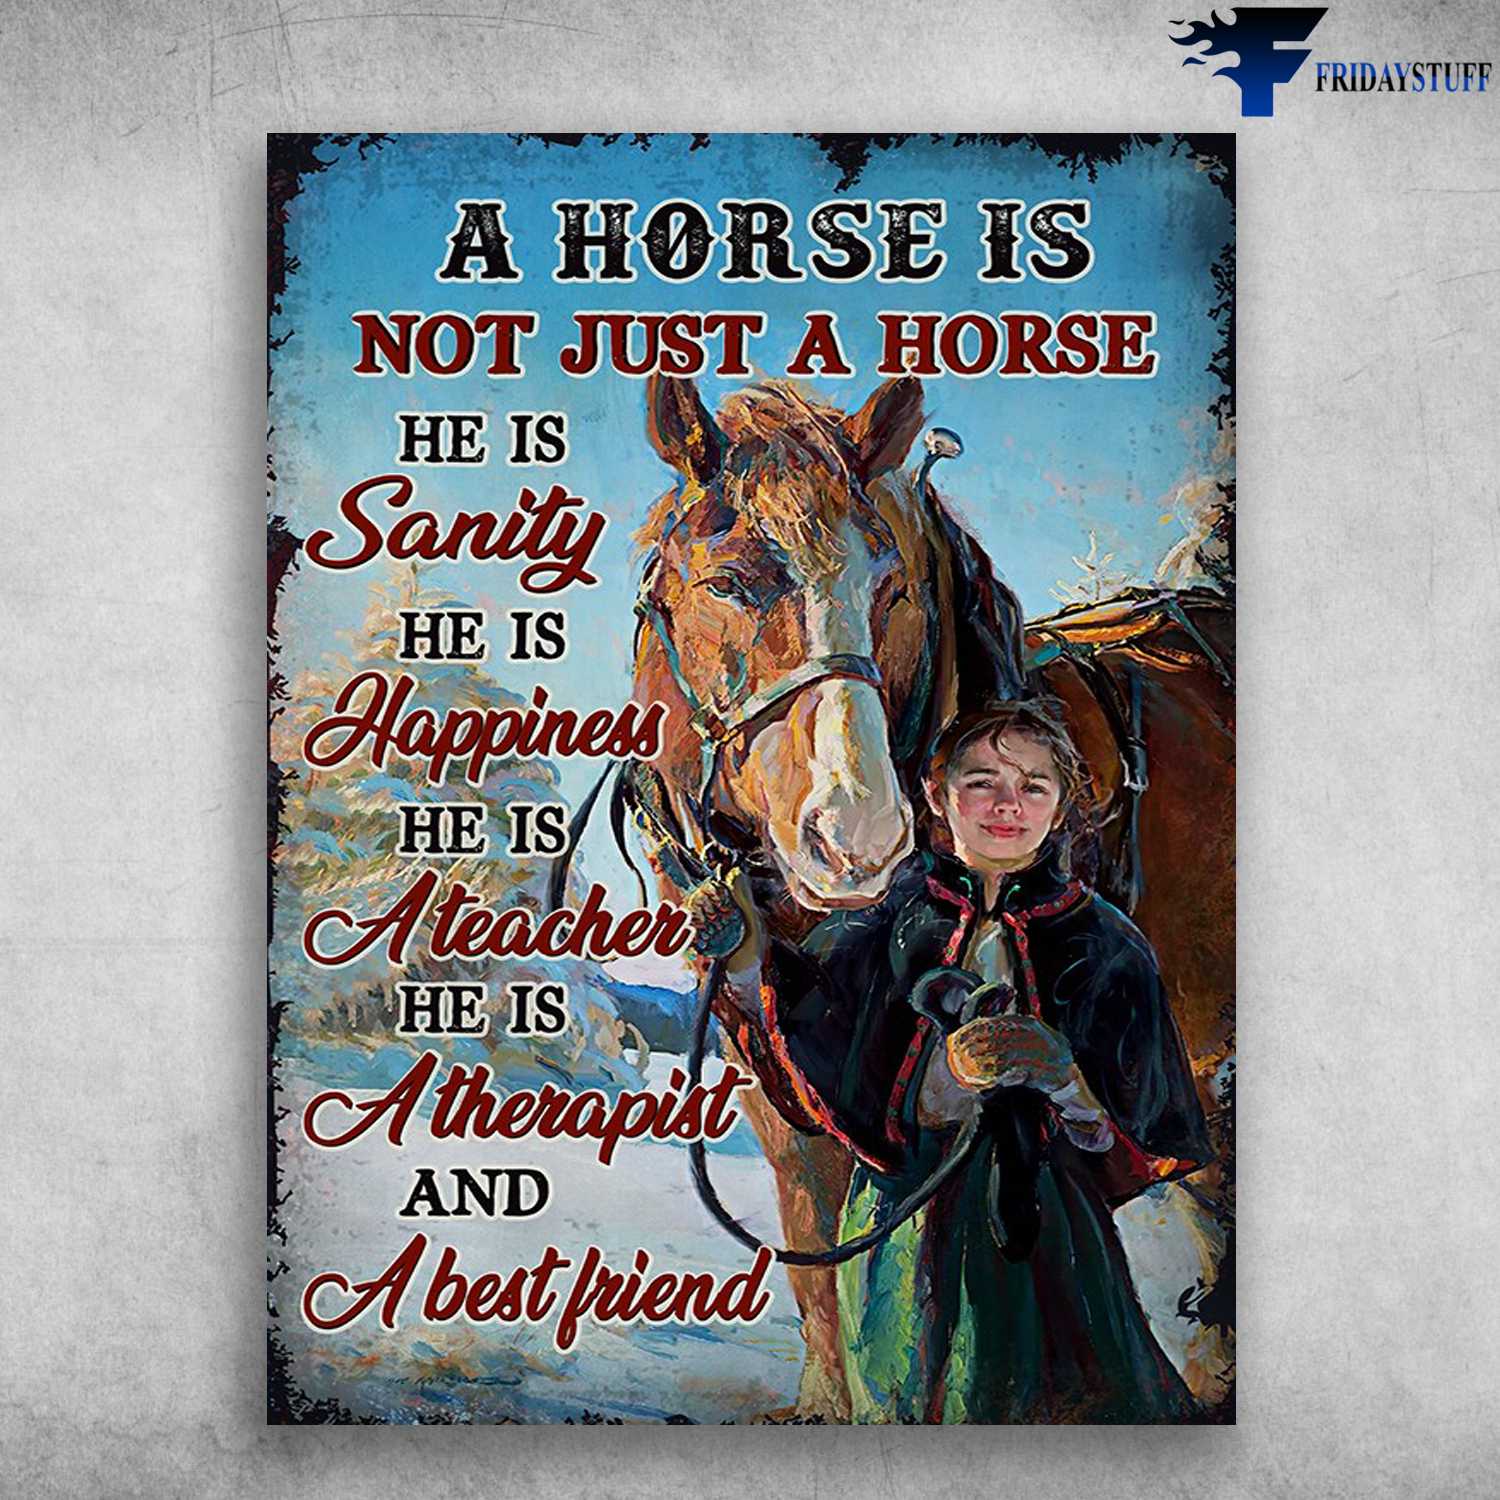 Horse Poster, Girl And Horse - A Horse Is Not Just A Horse, He Is Sanity, He Is Happiness, He Is A Teacher, He Is A Therapist, And A Best Friend